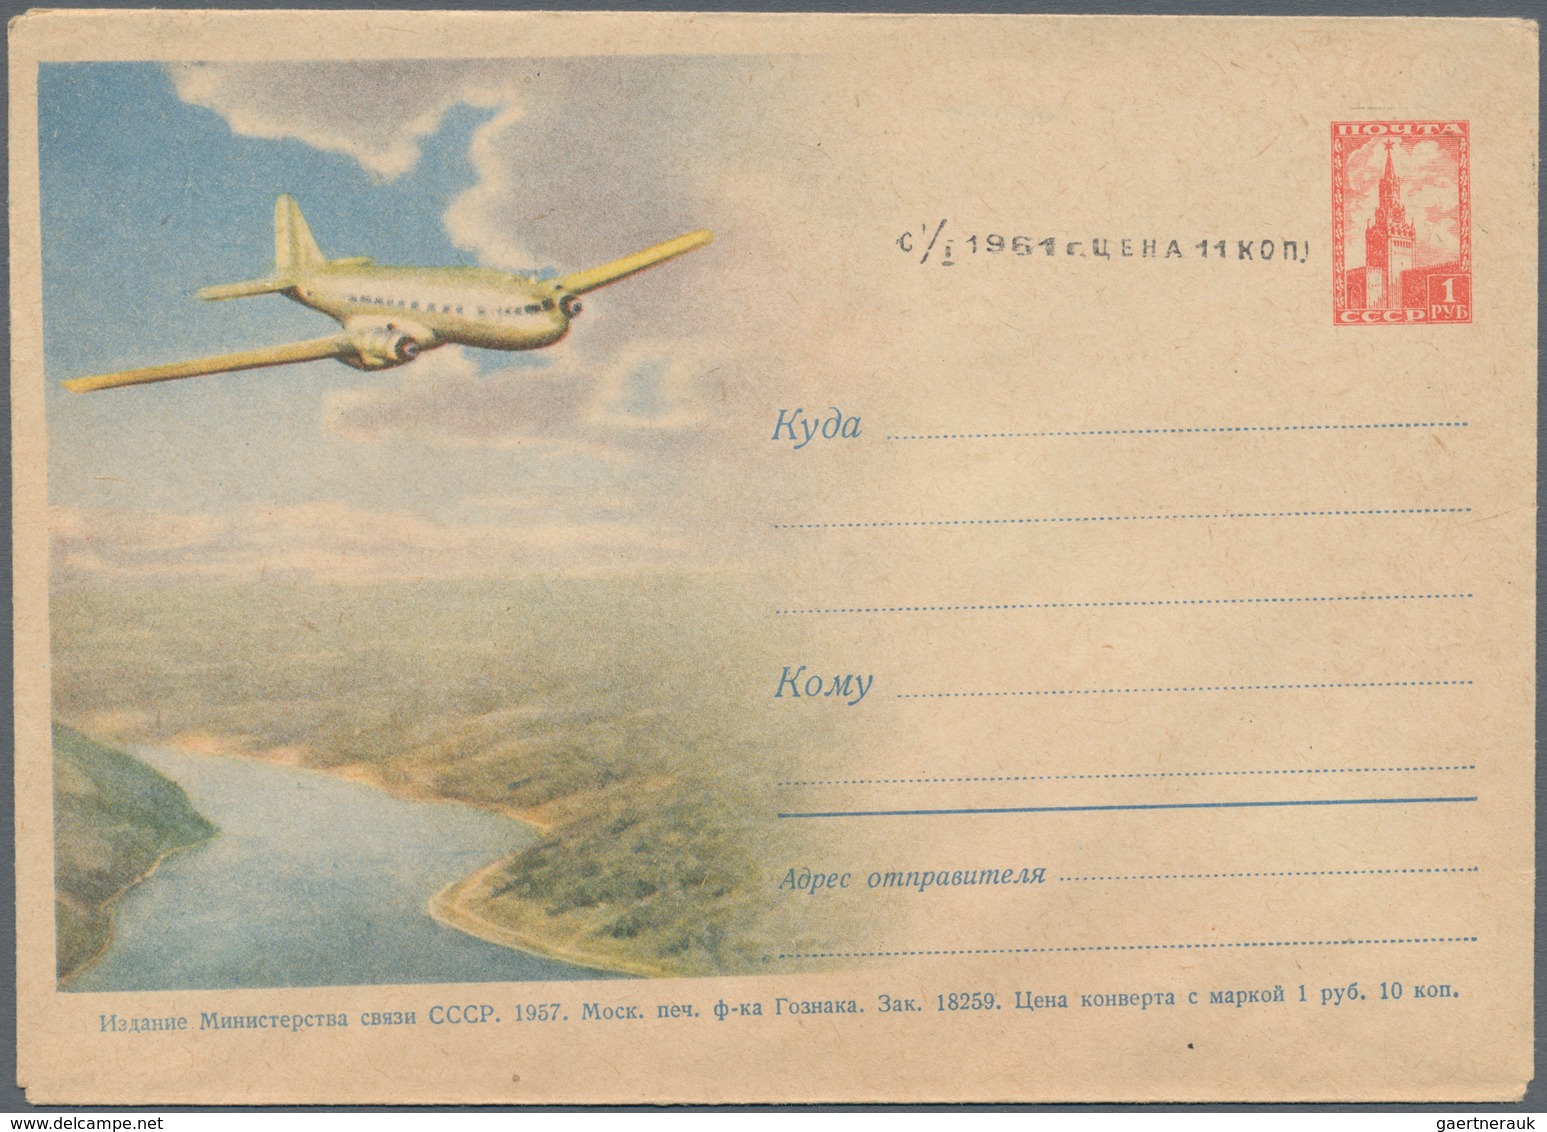 Sowjetunion: 1955/77 ca. 810 pictured postal stationery envelopes only airmail, very great variety o